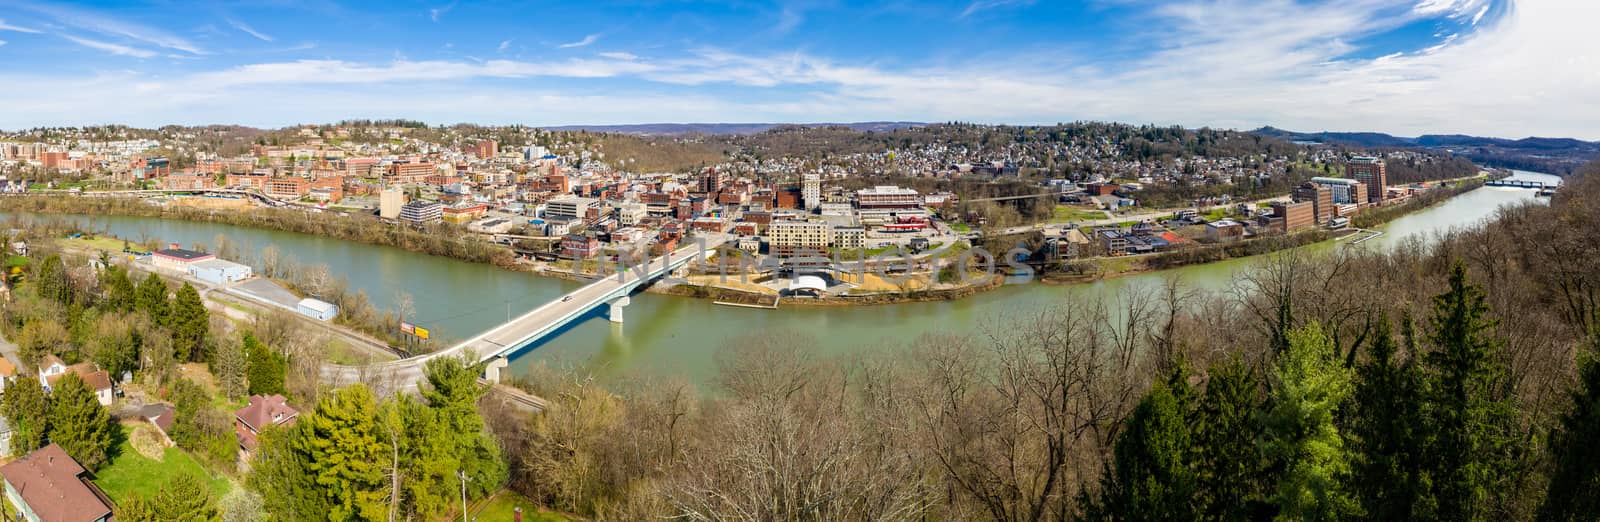 Aerial wide panoramic view of the downtown area of Morgantown WV and campus of West Virginia University taken from a drone above the city